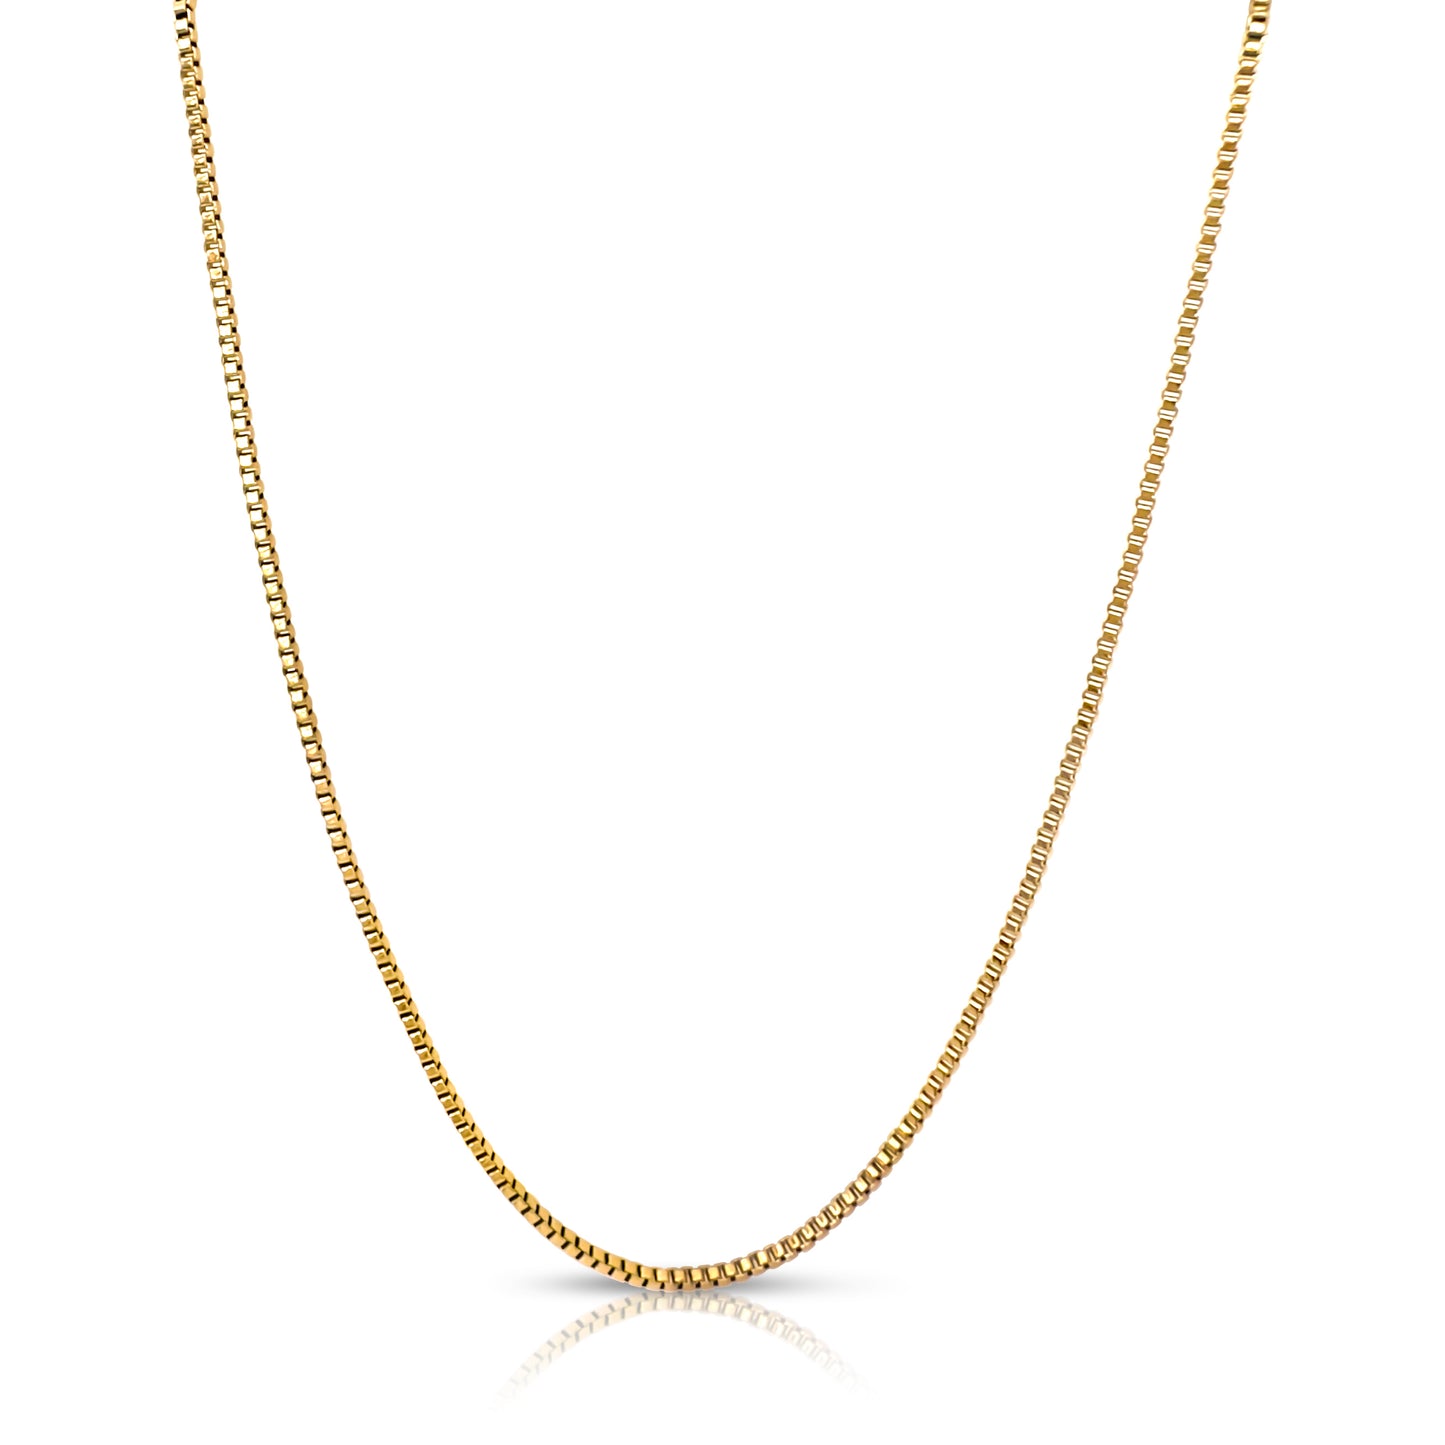 Time Out Chain Necklace - Ever Jewellery 